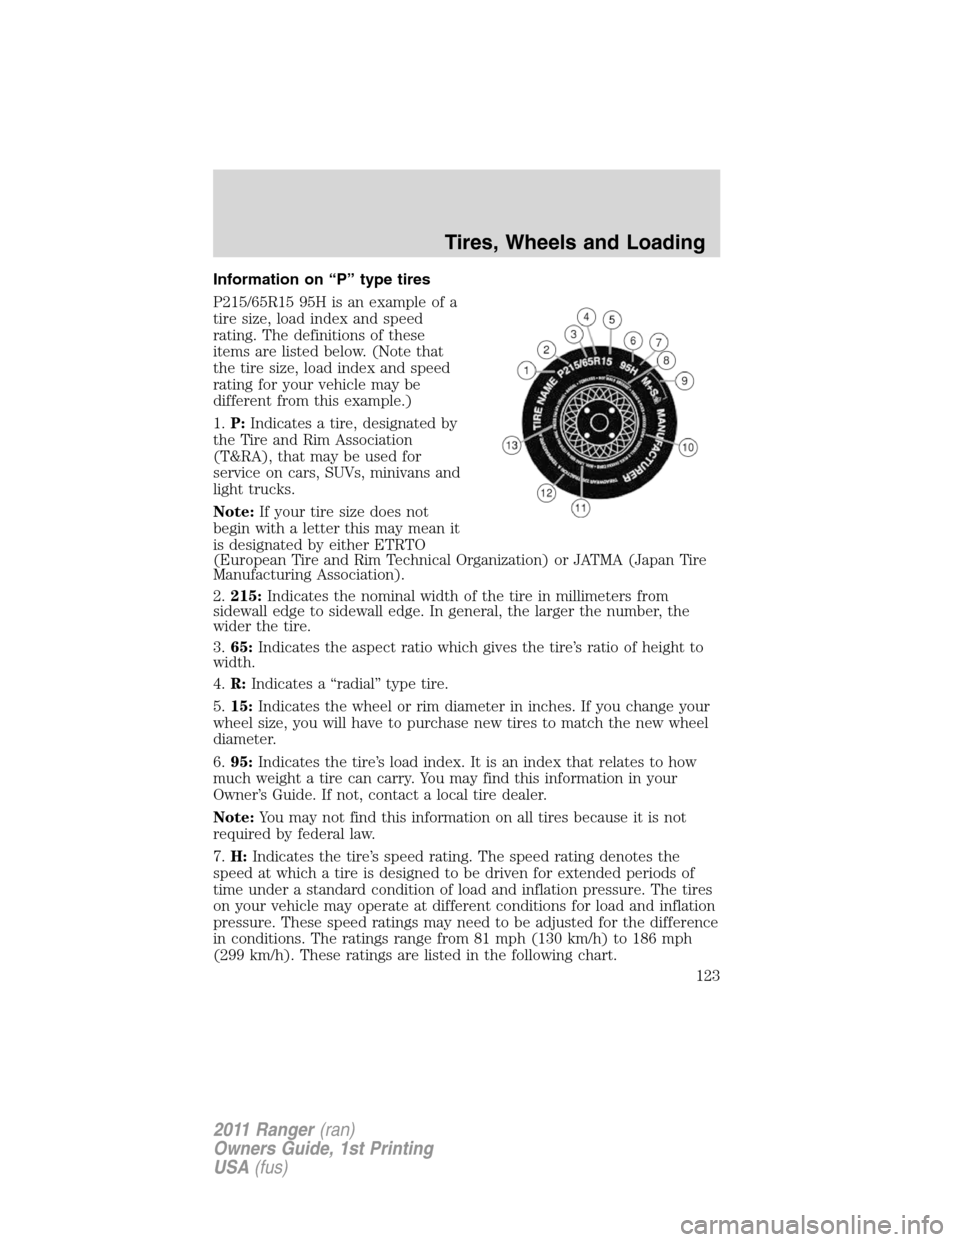 FORD RANGER 2011 2.G Owners Manual Information on “P” type tires
P215/65R15 95H is an example of a
tire size, load index and speed
rating. The definitions of these
items are listed below. (Note that
the tire size, load index and sp